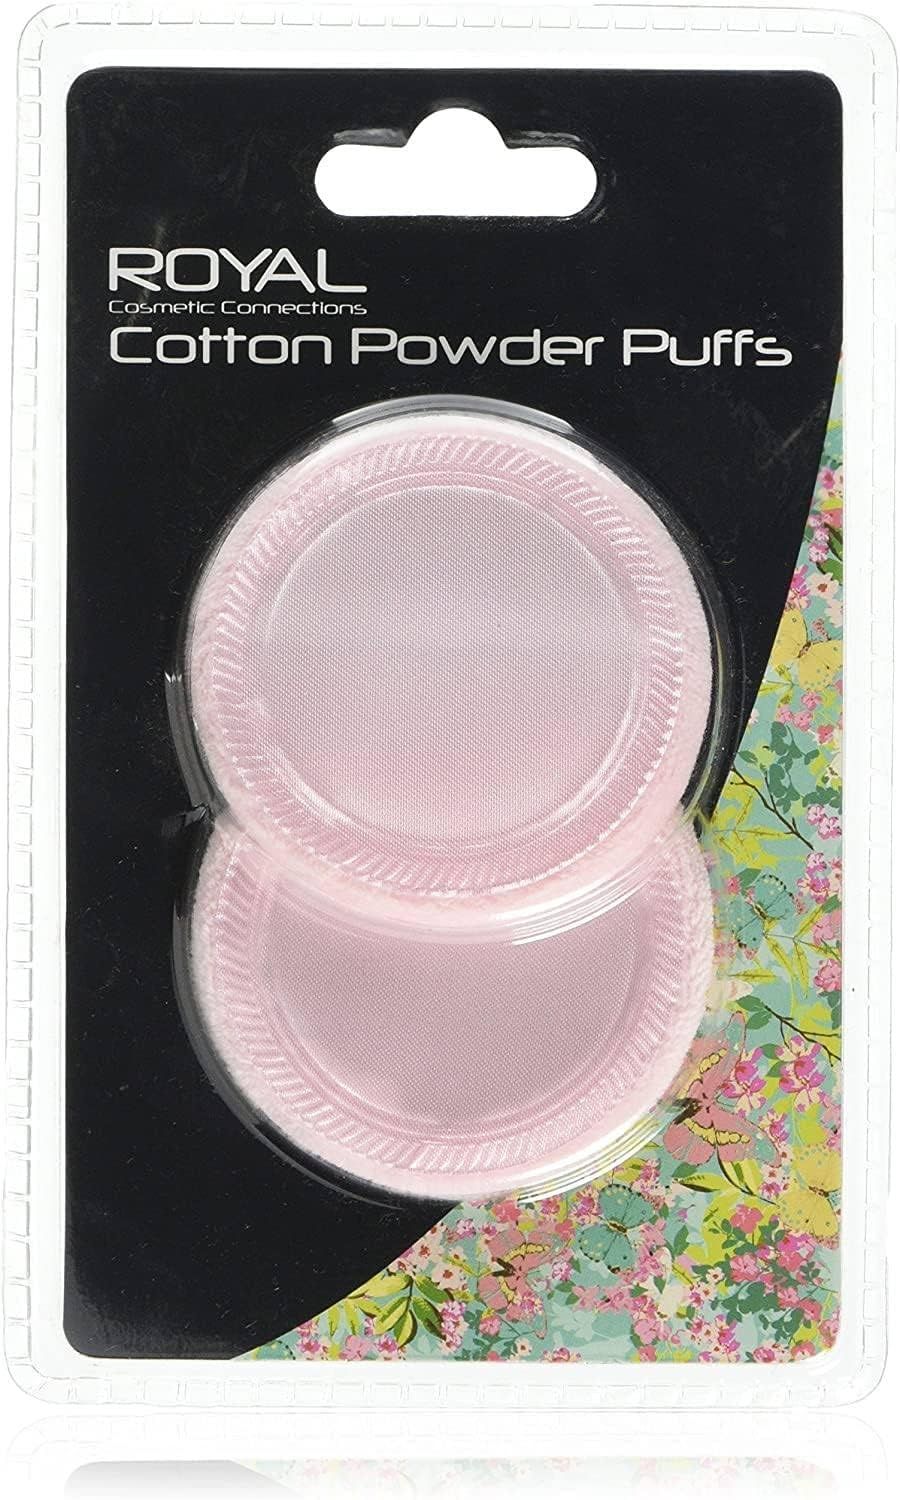 Cotton Face Powder Puffs Pack of 2 by Royal Cosmetics | Merthyr Tydfil | Why Not Shop Online